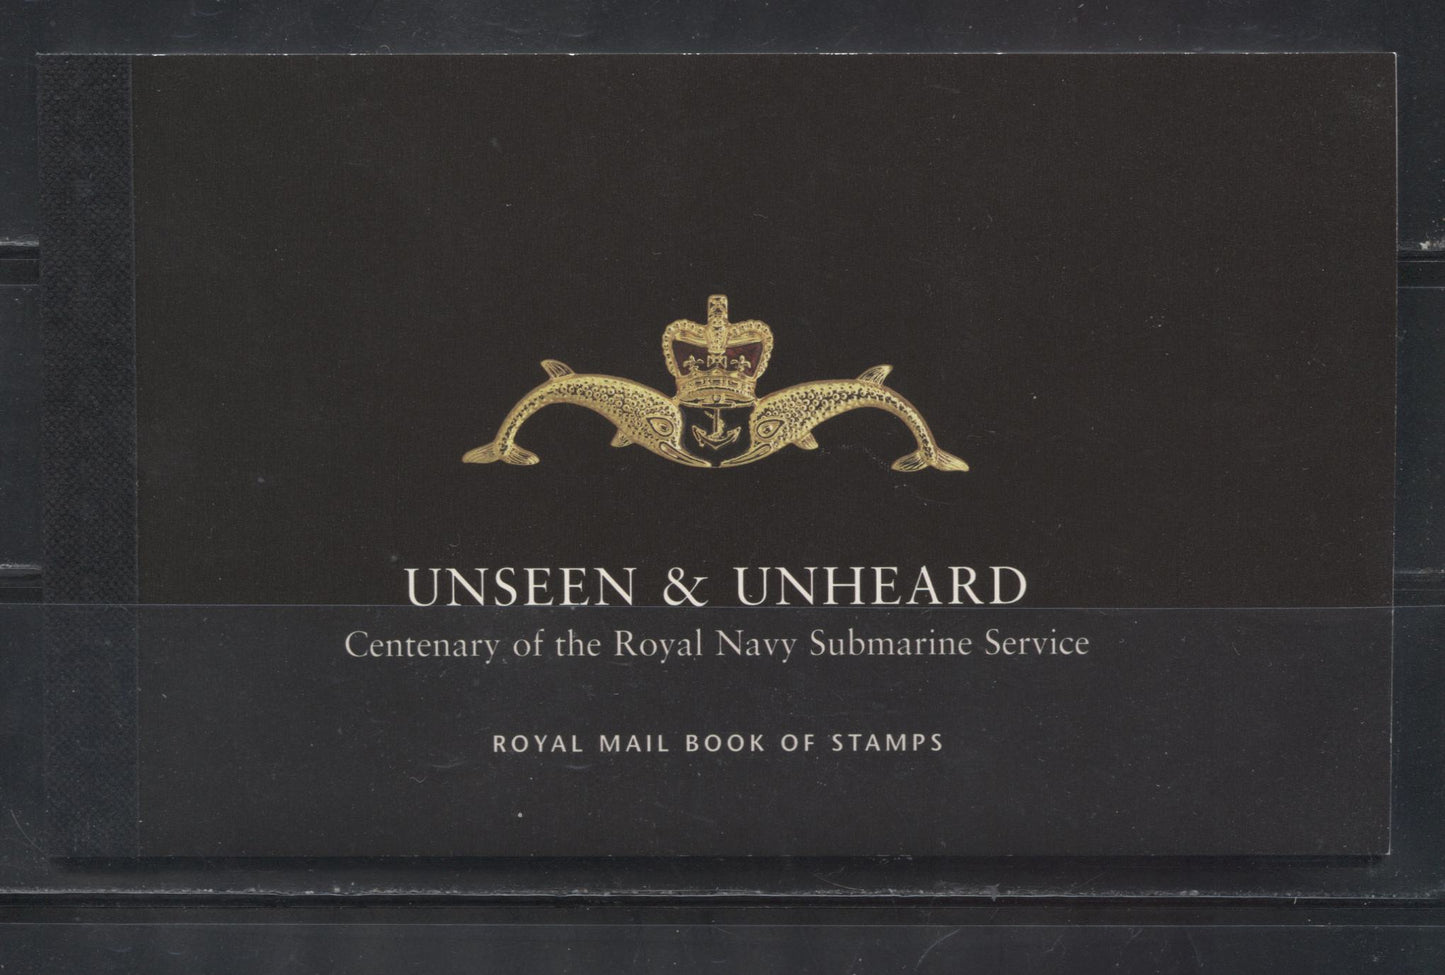 Great Britain SG#DX27 2001 Unseen & Unheard Prestige Booklet Containing Commemorative Stamps and Scottish Regional Definitives